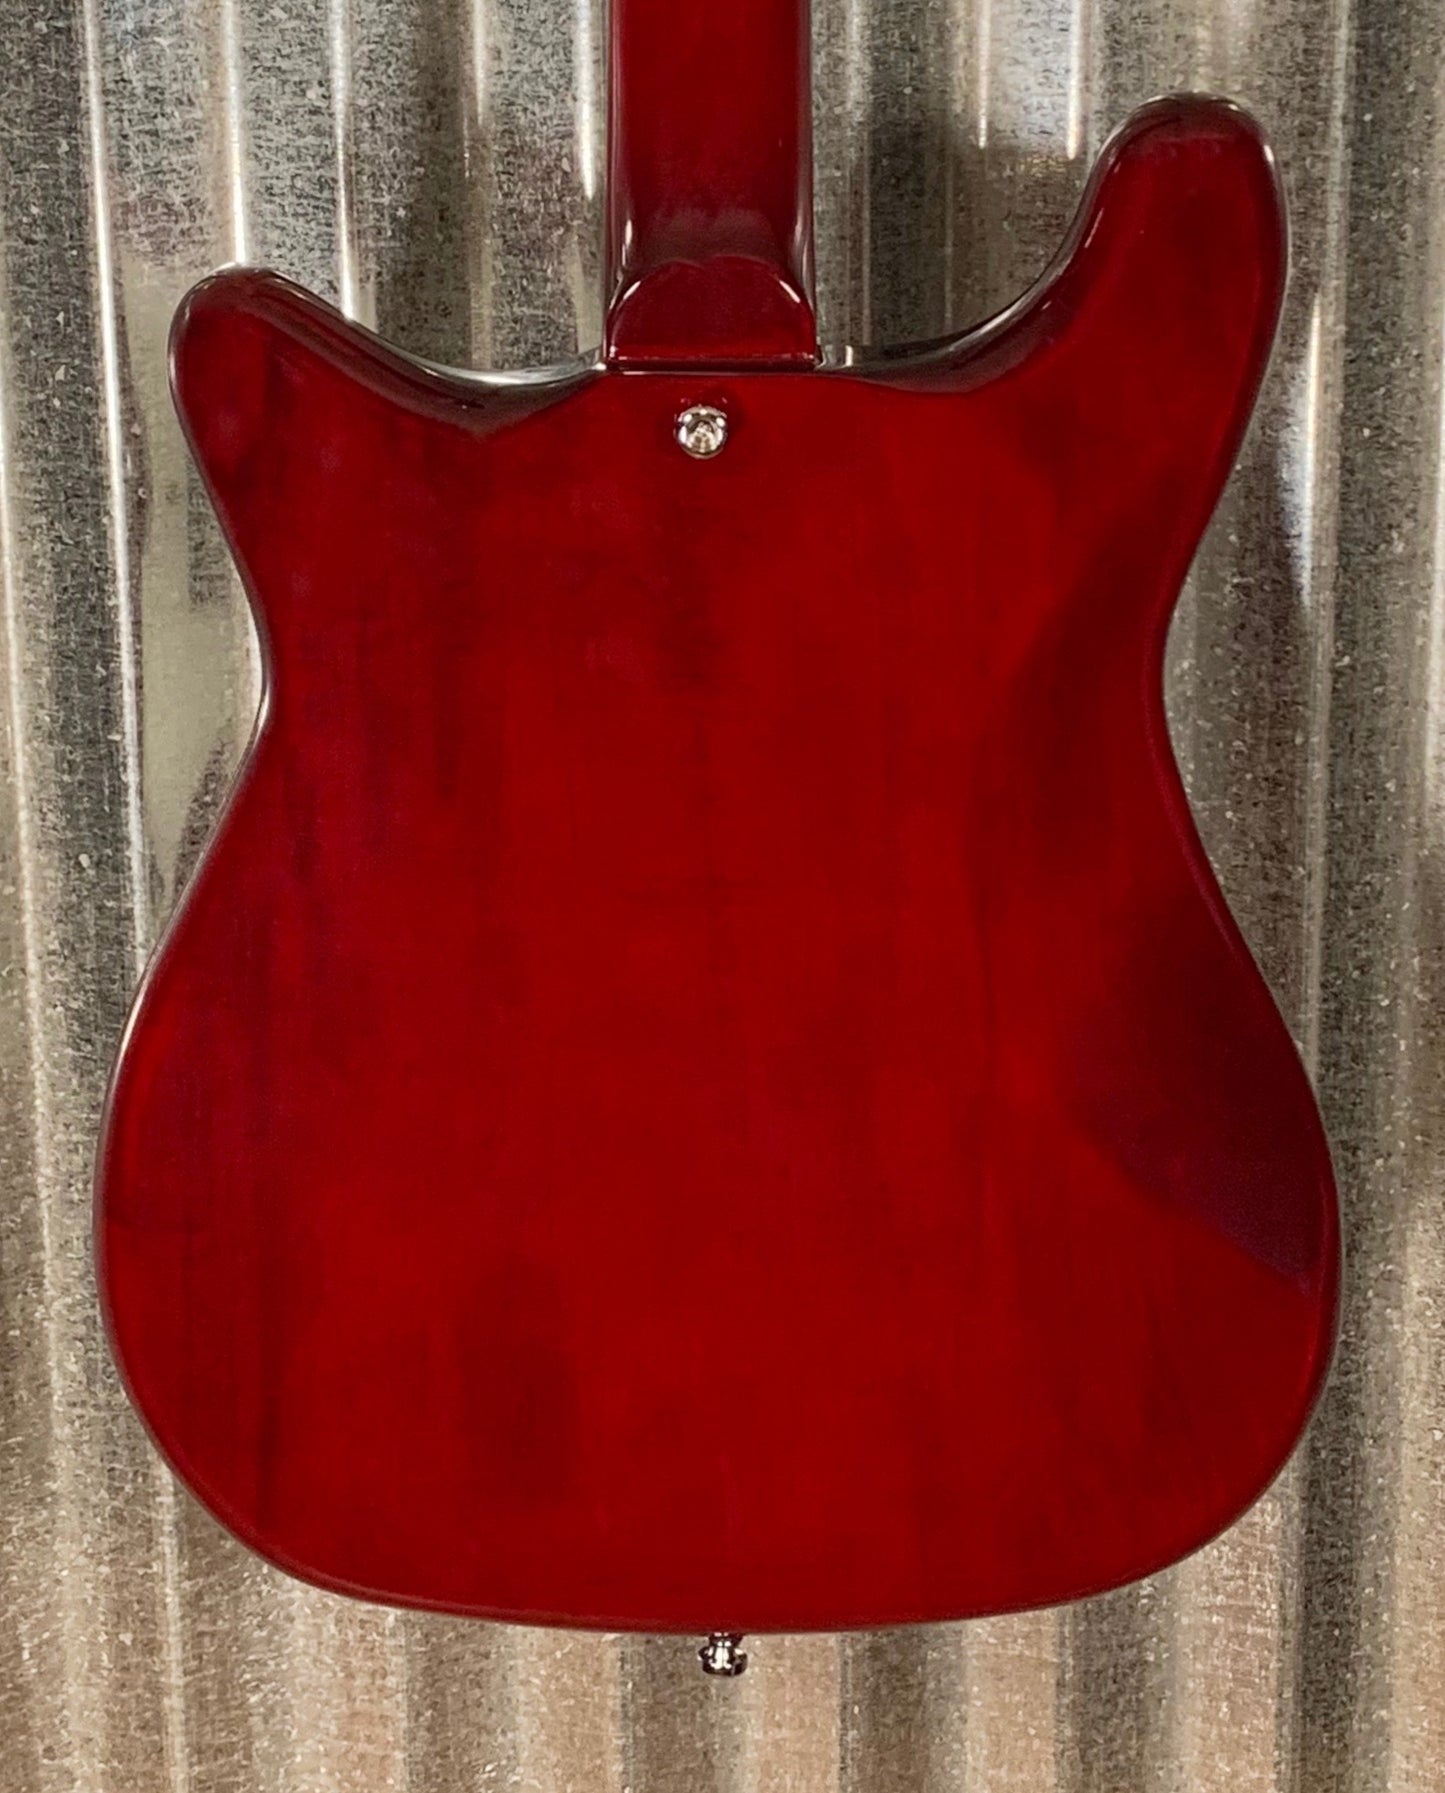 Eastwood Newport 4 String Short Scale Bass Cherry & Bag